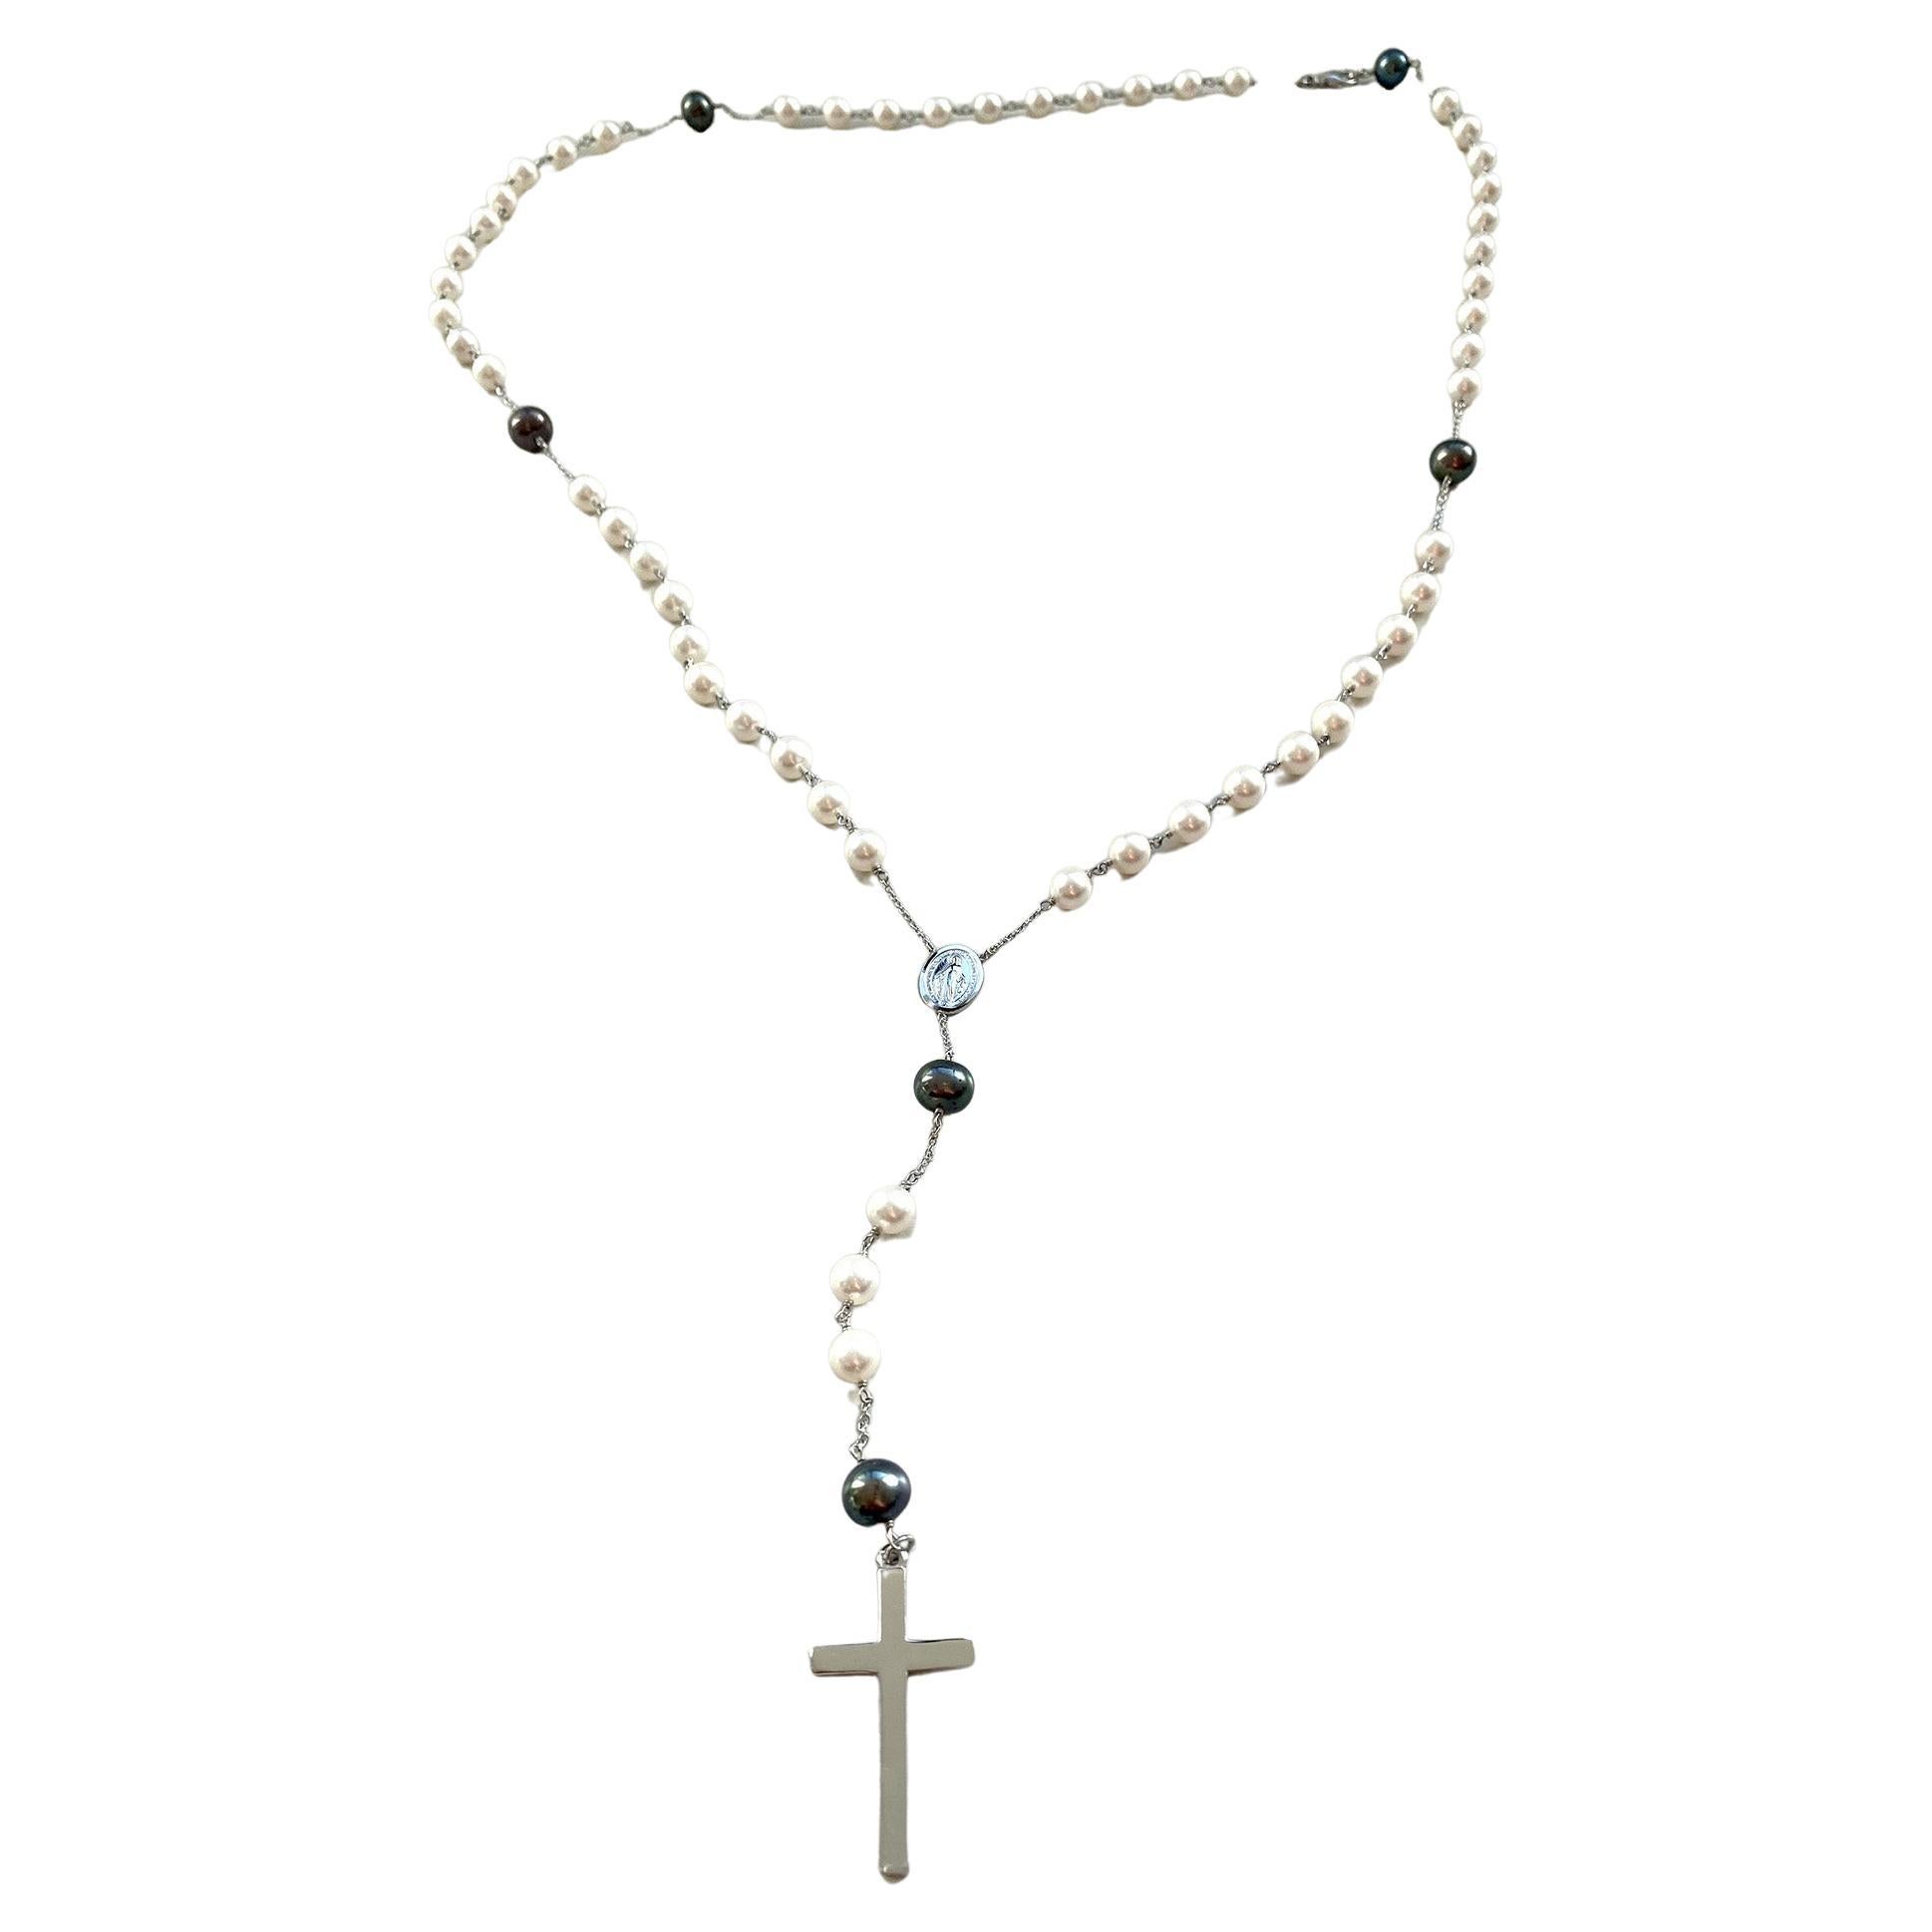 Rosary Necklace with Natural Akoya Pearls and Natural Black Pearls, 18kt Gold